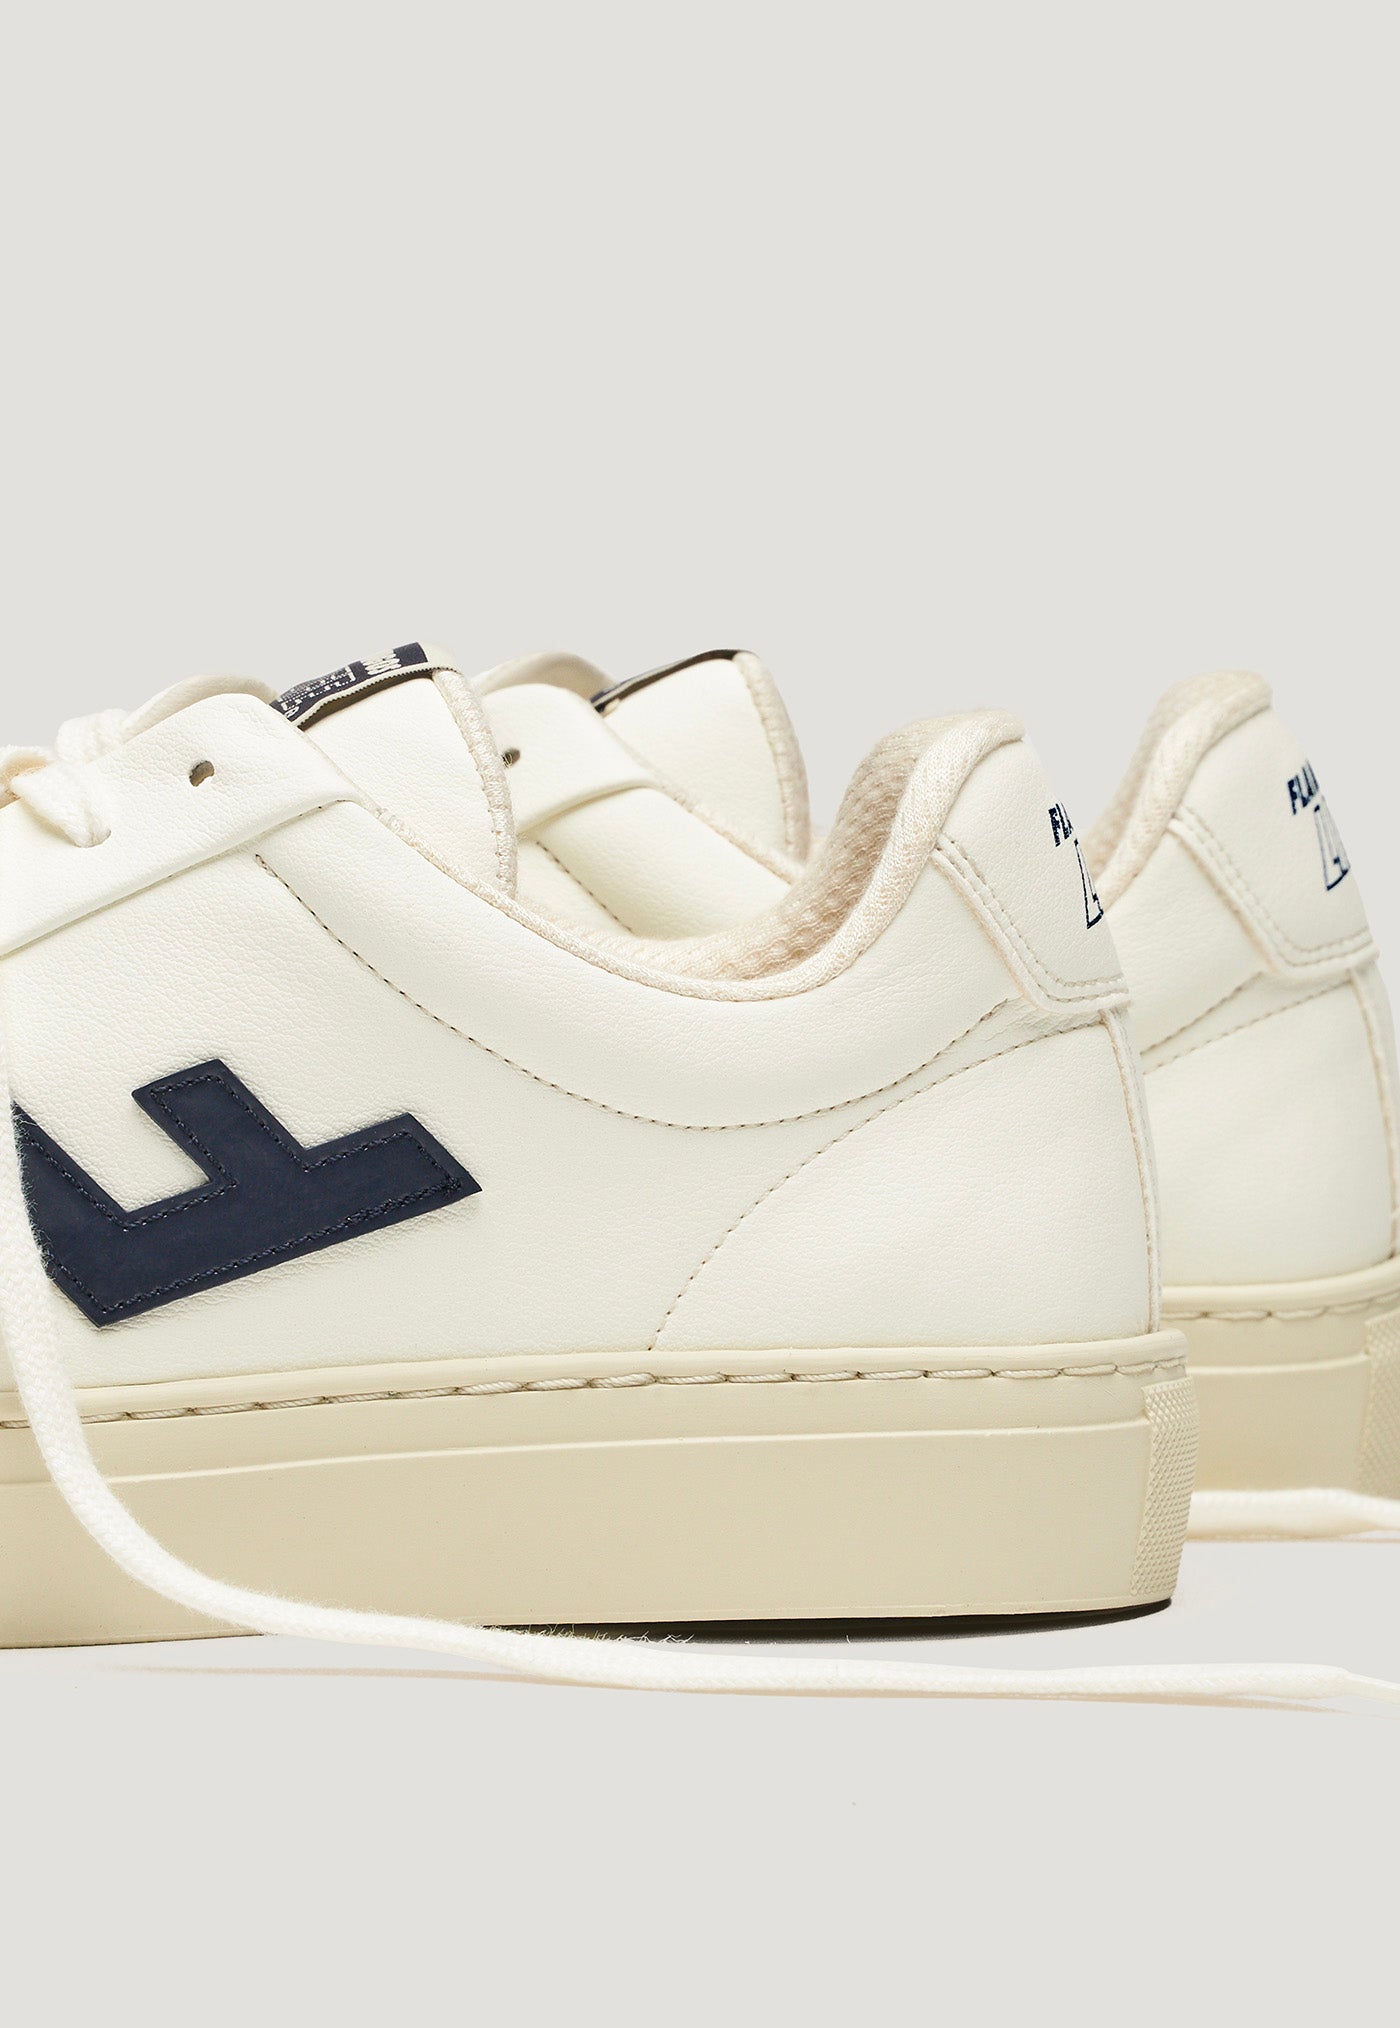 Classic 70s Sneakers - Off White Navy Ecru sold by Angel Divine